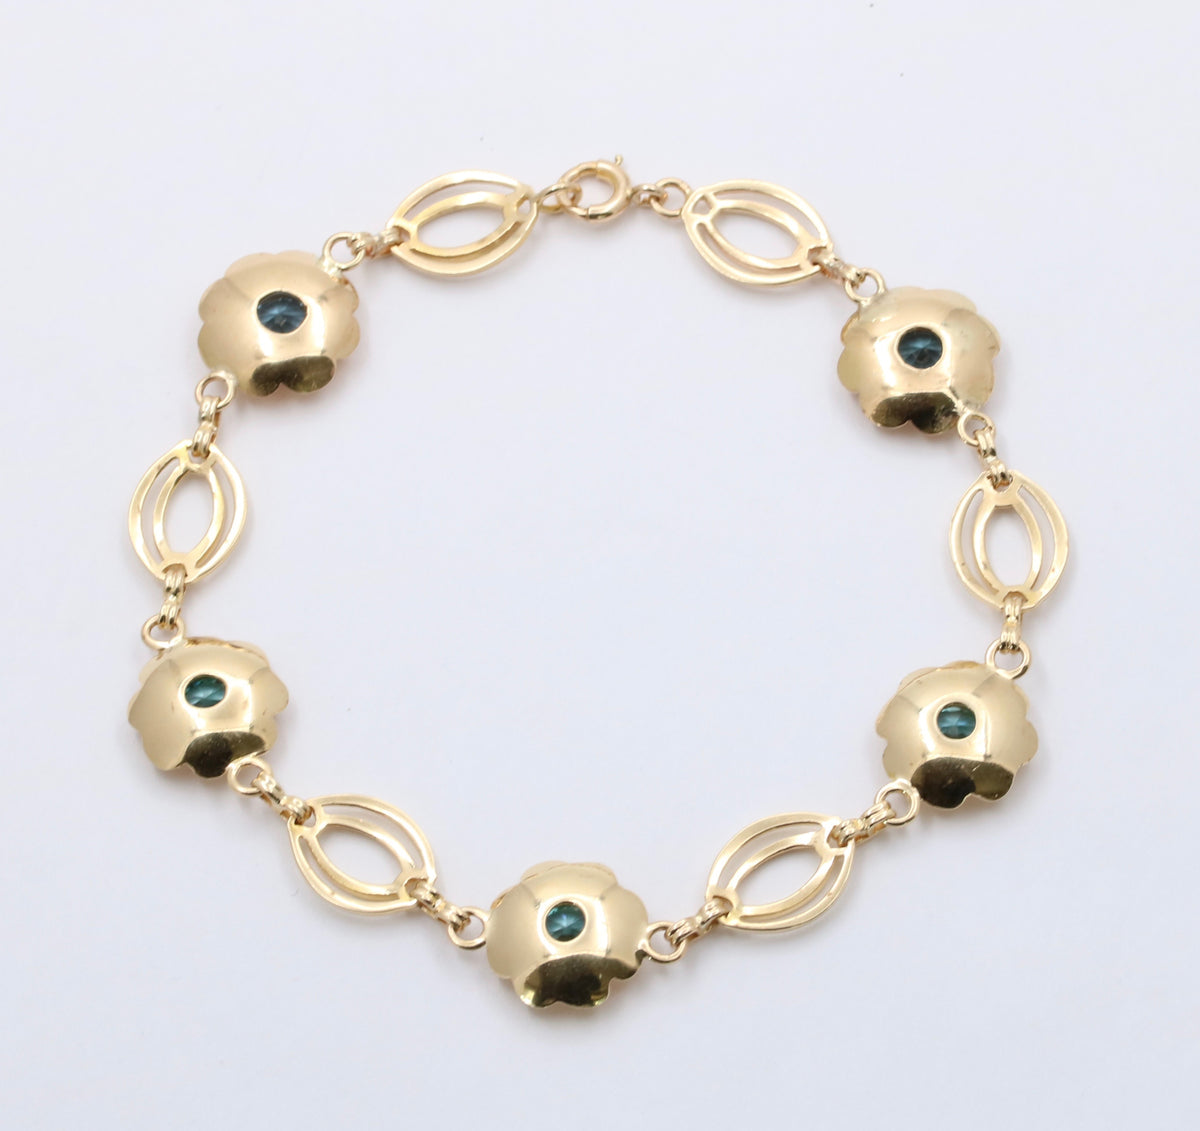 Vintage 14K Yellow Gold and Blue Zircon Floral Bracelet, 8 Inches